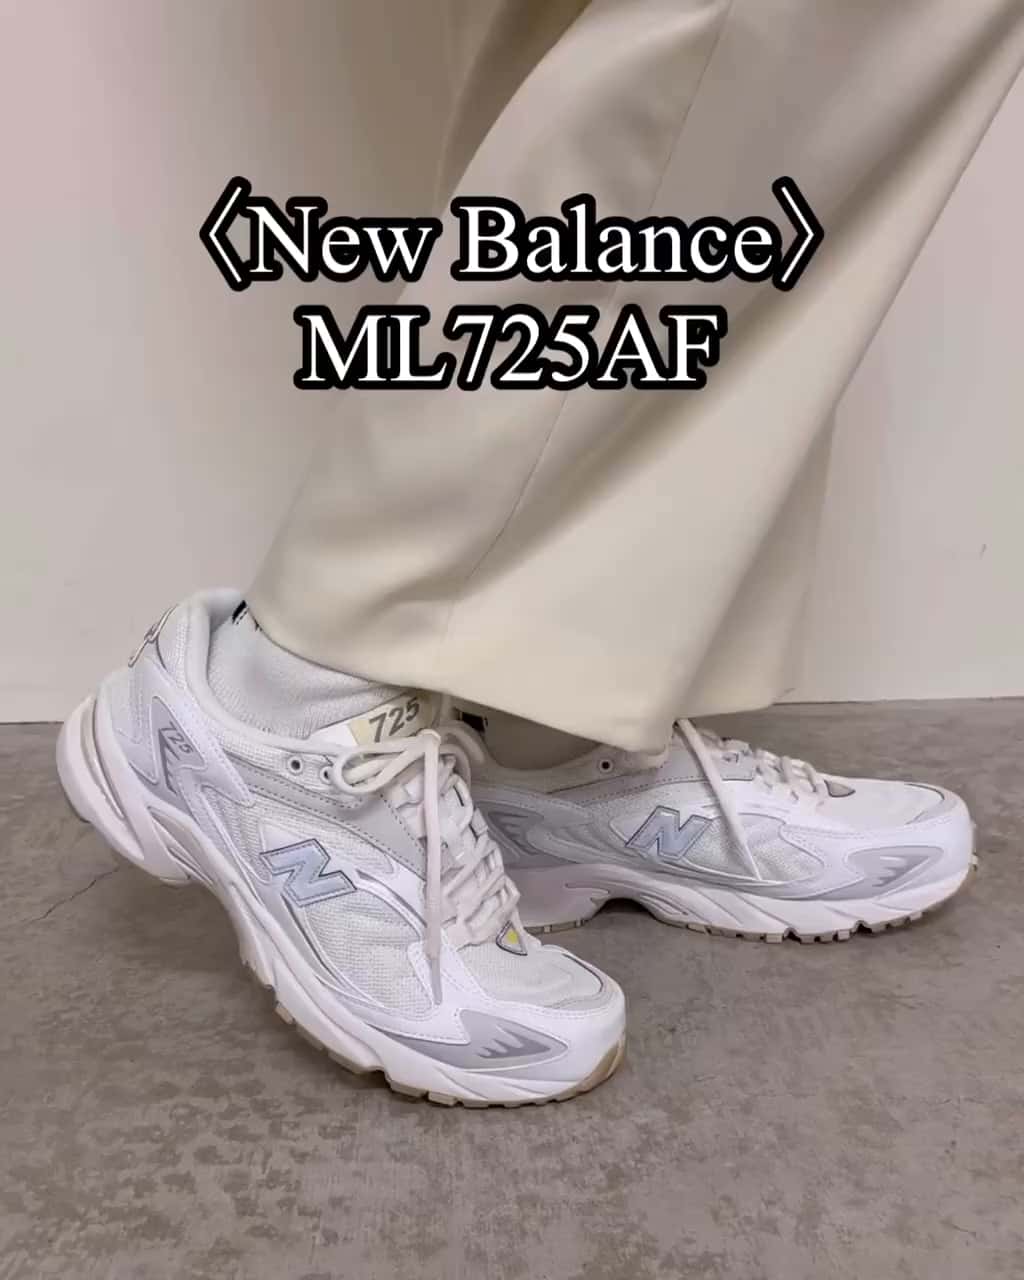 HOT爆買い ＜New Balance＞ML725AF/スニーカー BEAUTY & YOUTH UNITED